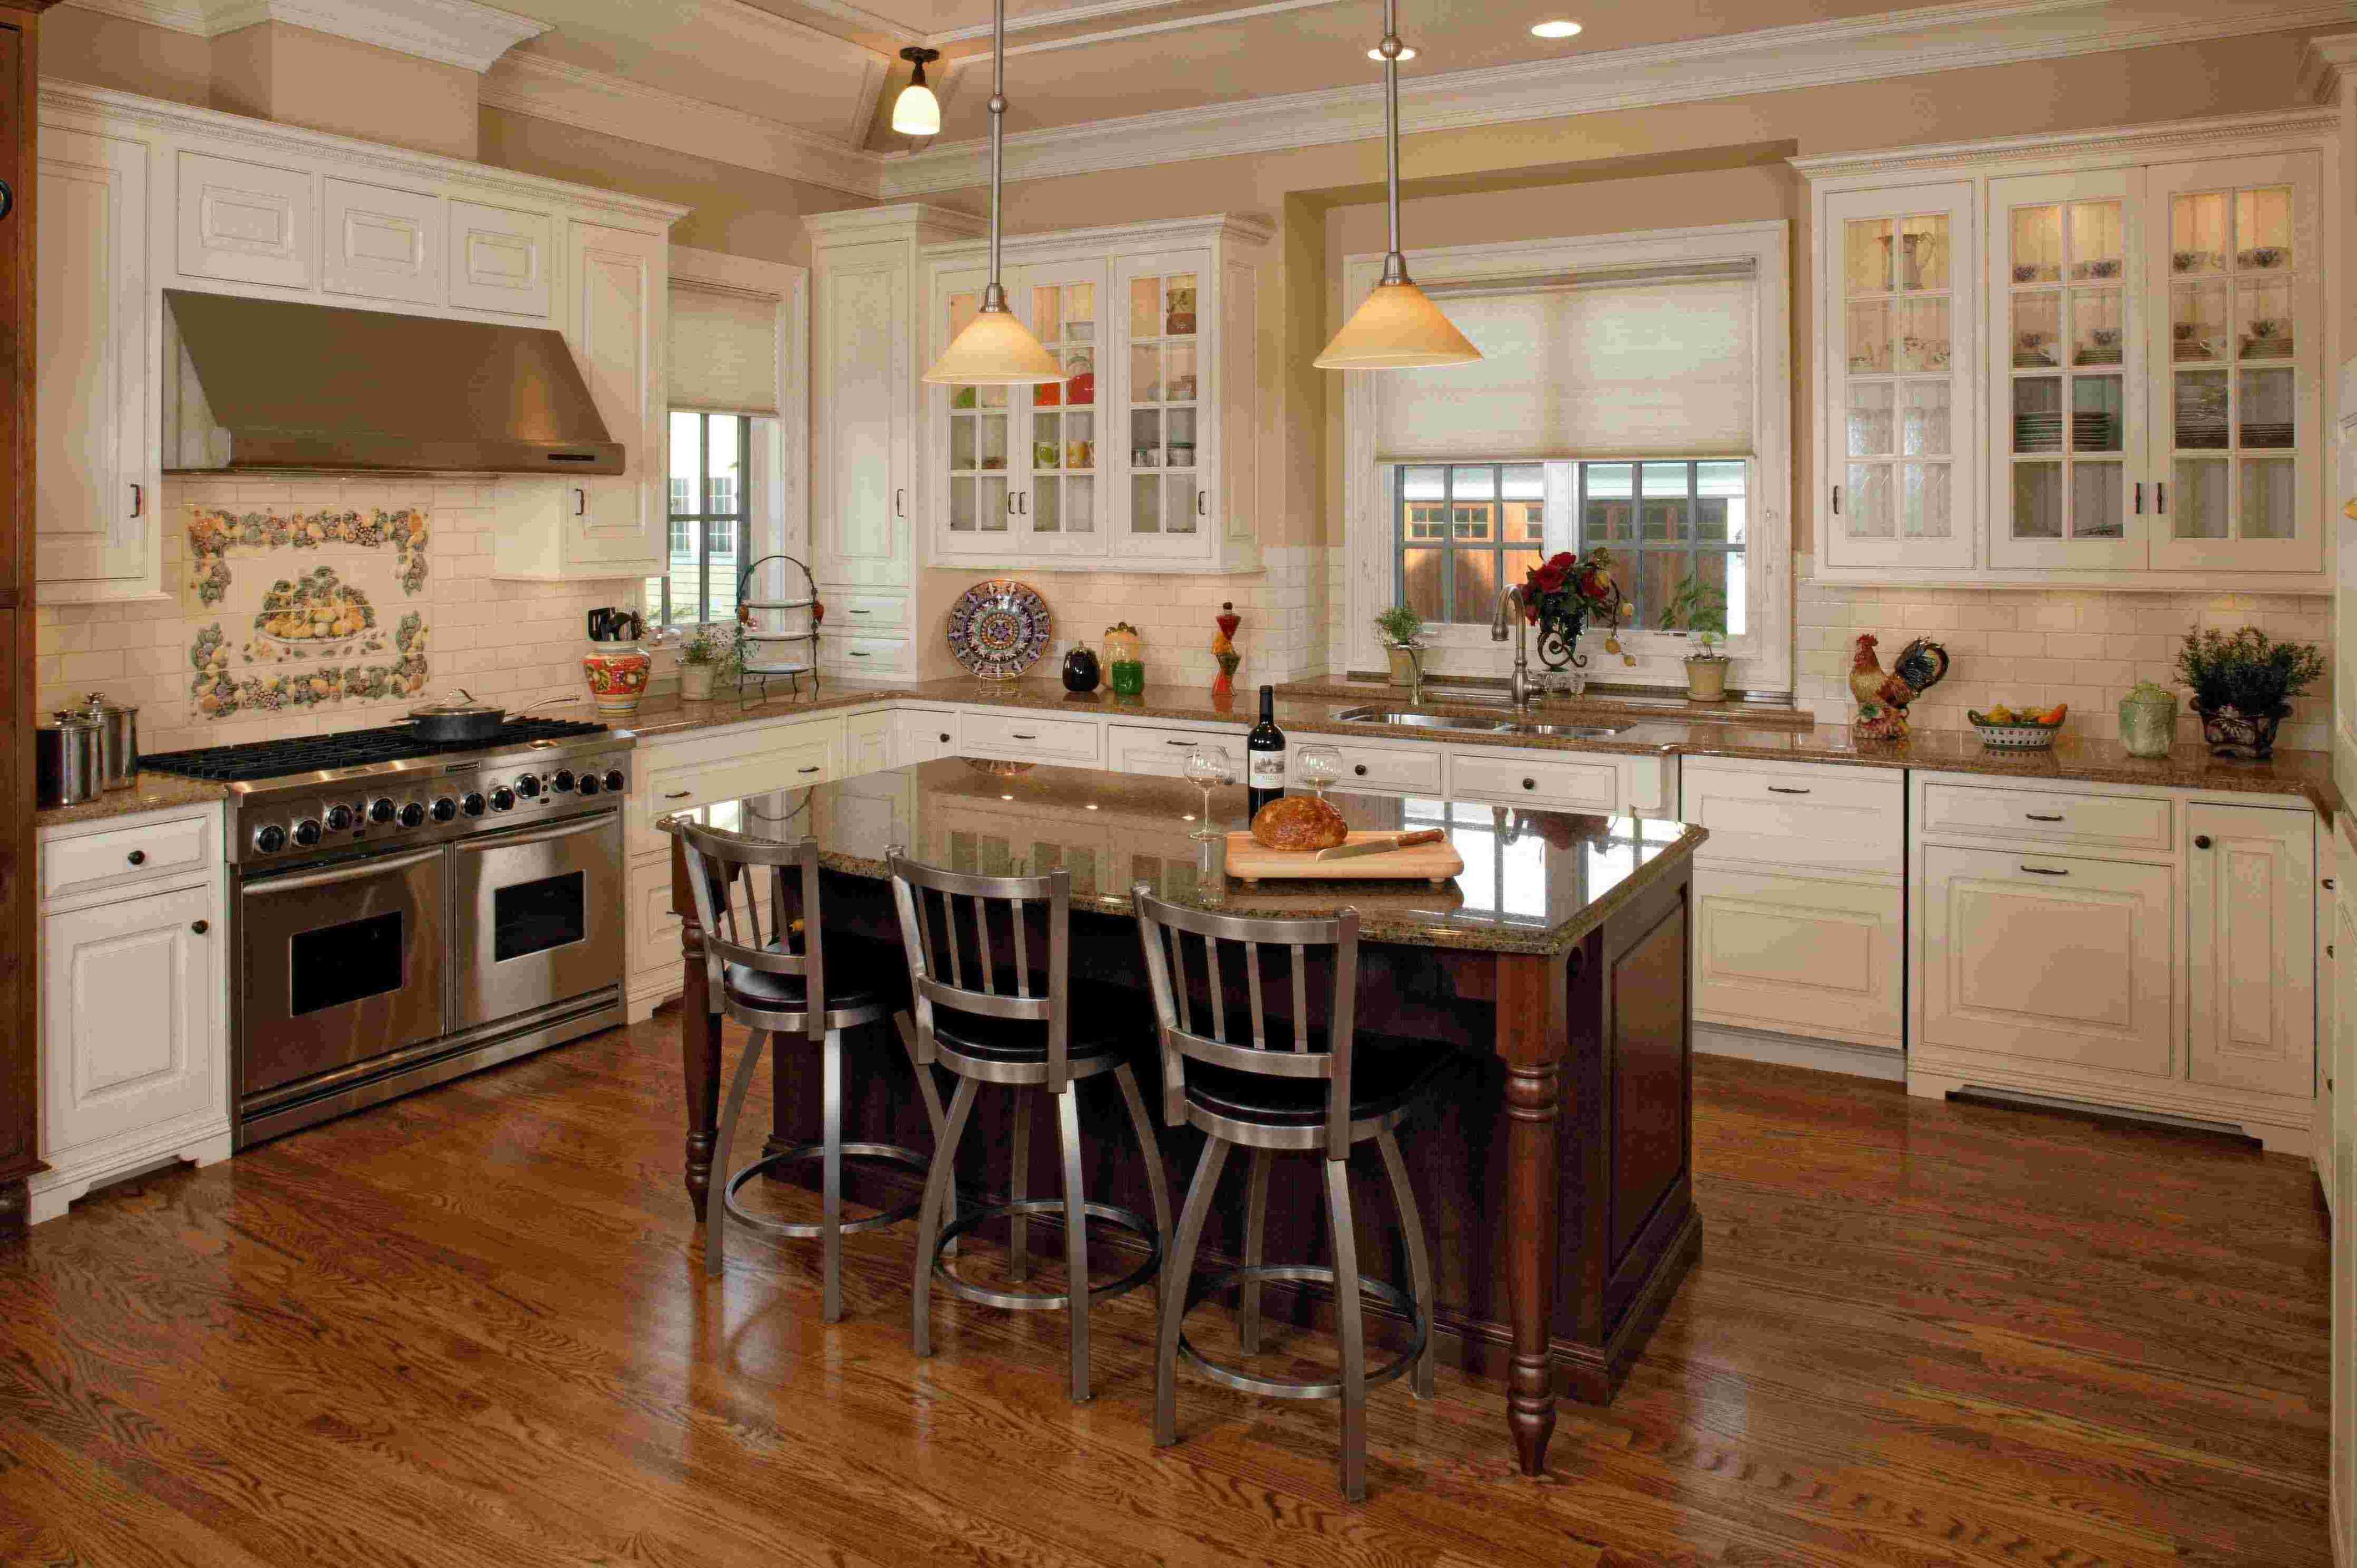 Kitchen Kitchens With Islands Incredible On Kitchen And Awesome Portable Seating Inspirations For Small 0 Kitchens With Islands